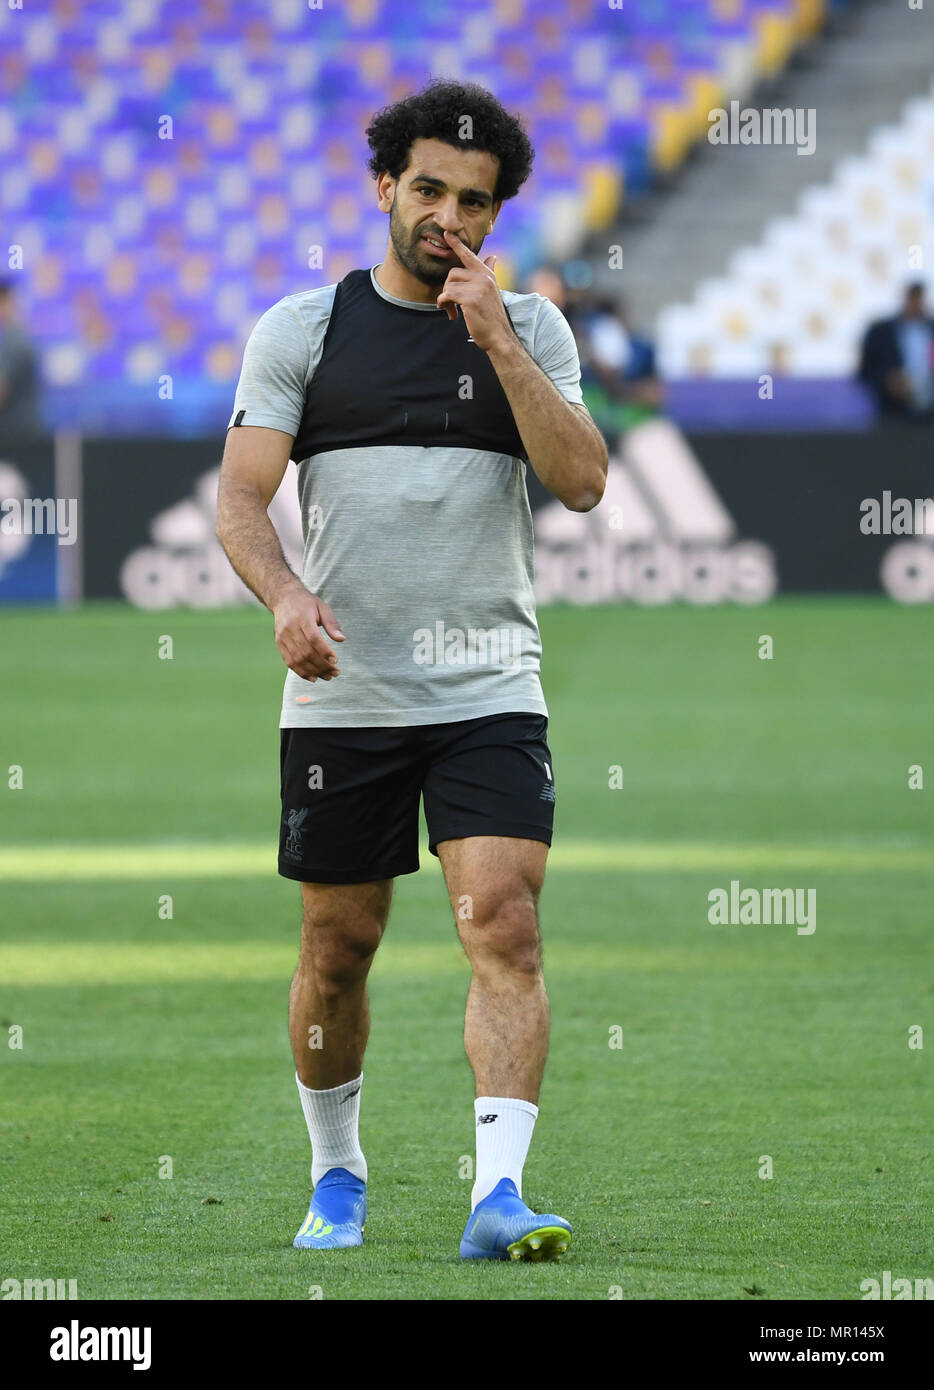 25 May 2018, Ukraine, Kiev: Football, Liverpool FC training: Mohamed Salah  pictured during training at the Olimpiyskiy National Sports Complex. Real  Madrid and Liverpool FC are set to meet in the Champions